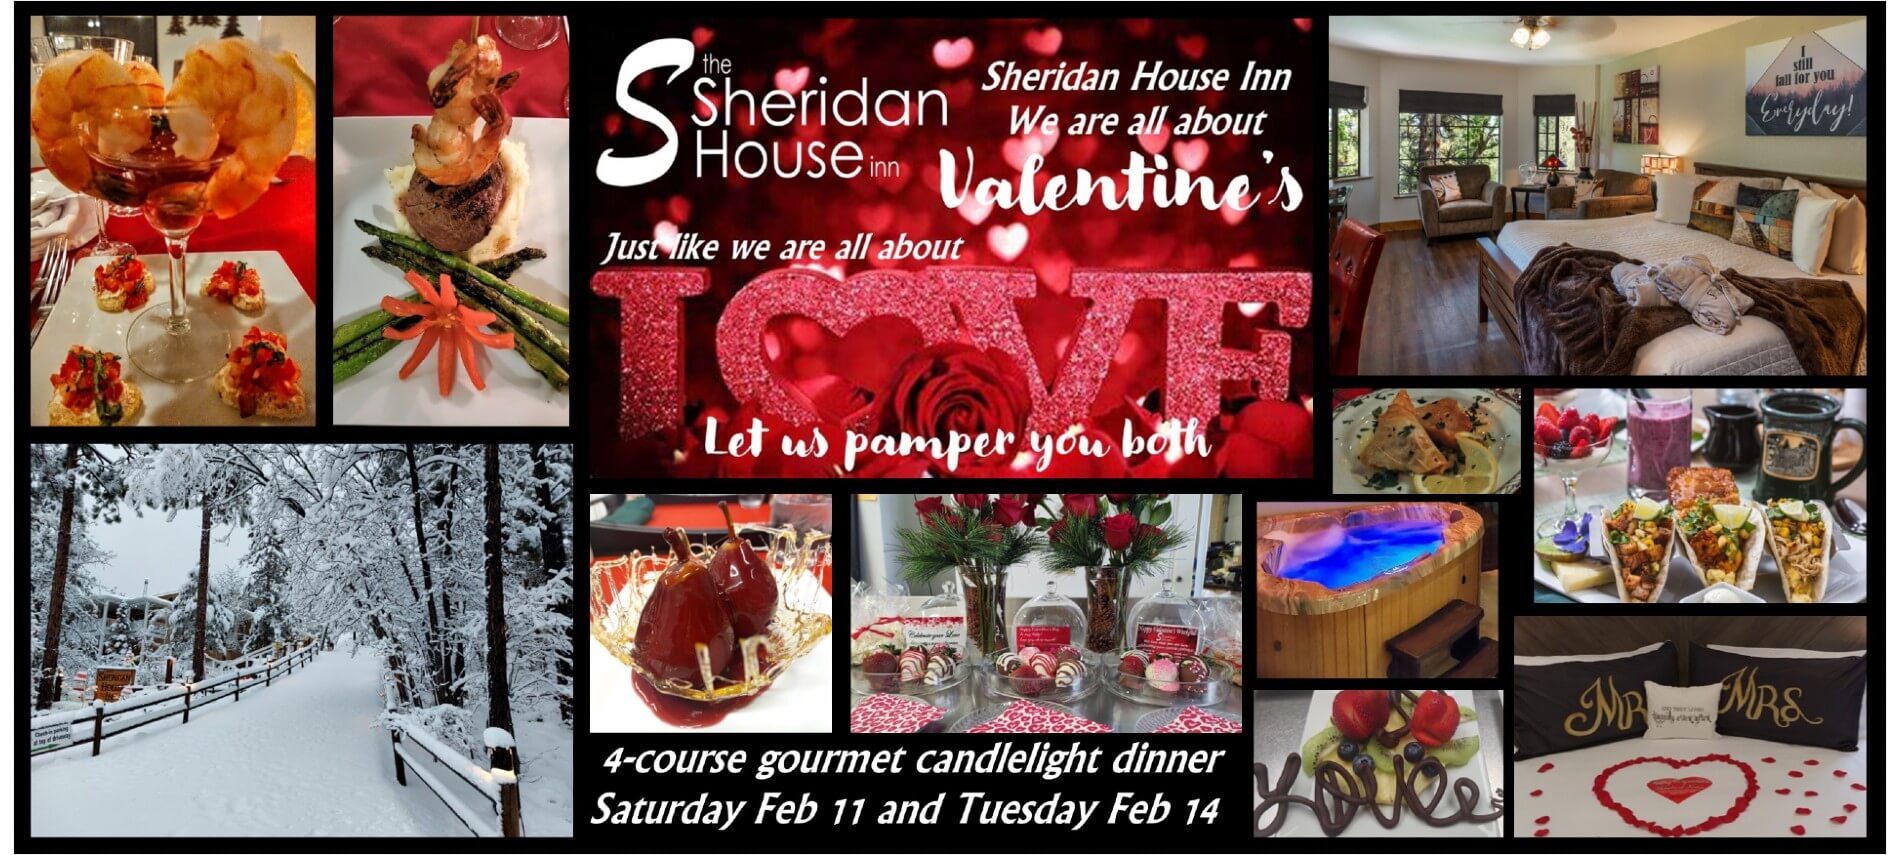 picture collage with words "Sheridan House Inn We are all about Valentines and we are all about love